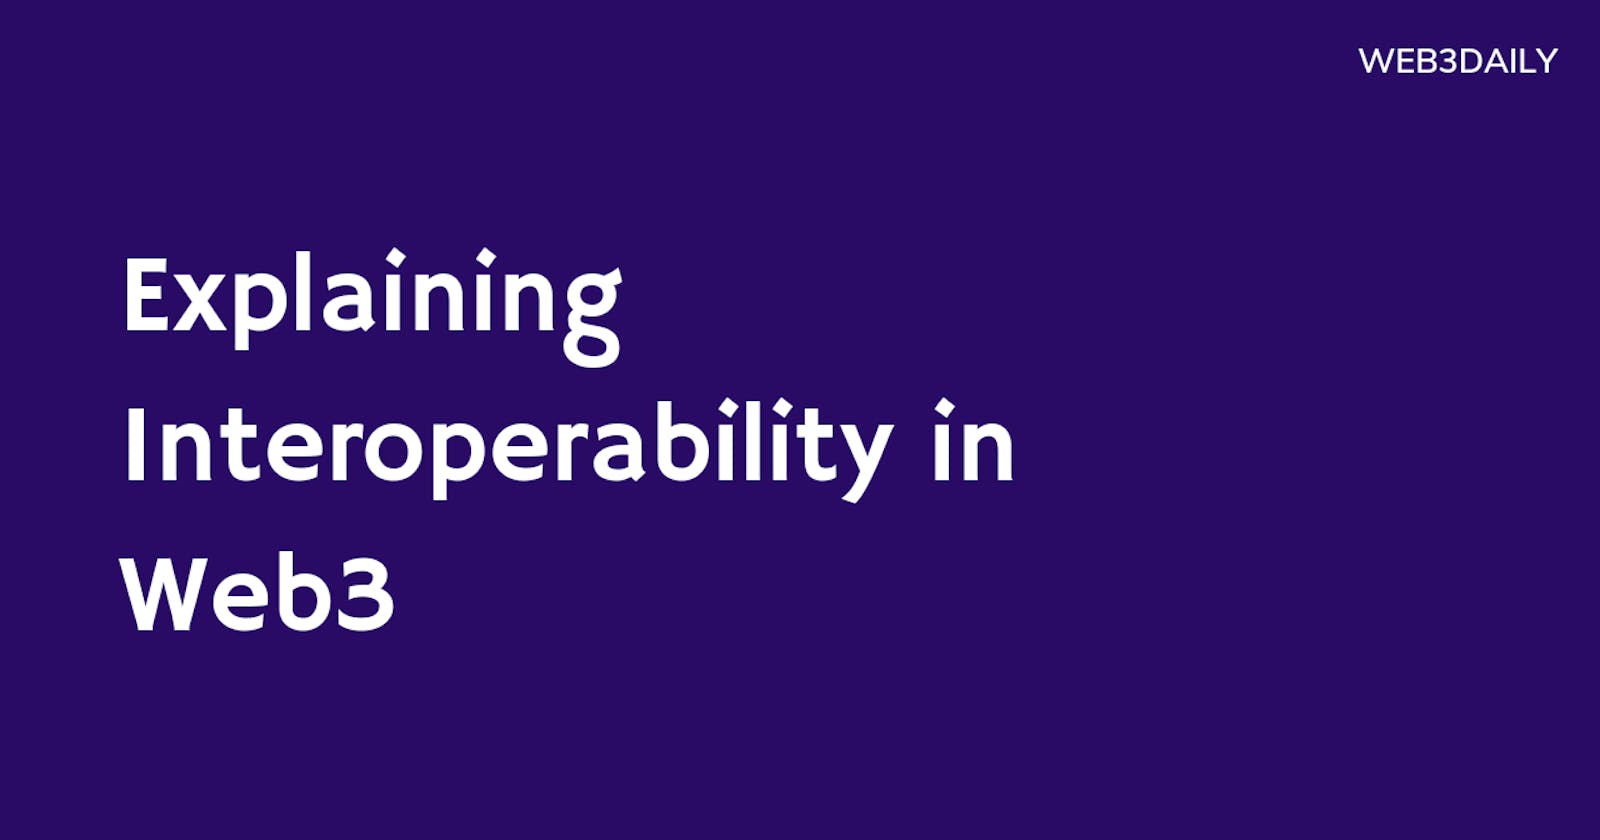 Why Interoperability in Web3 is important